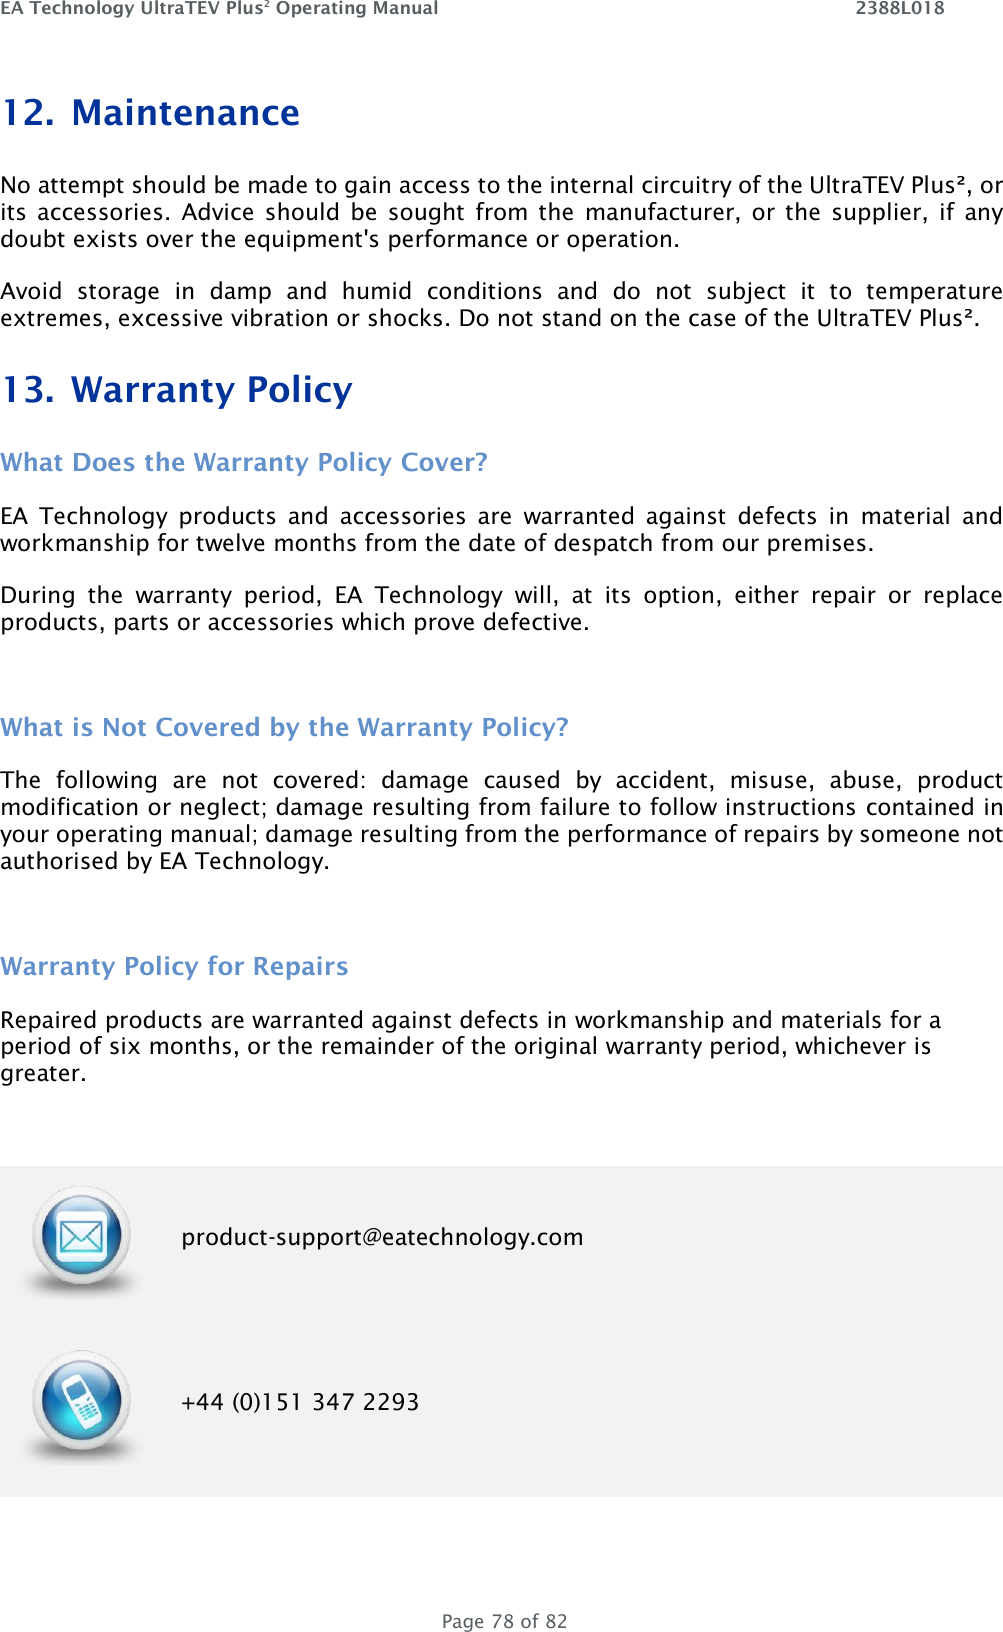 EA Technology UltraTEV Plus2 Operating Manual    2388L018   Page 78 of 82 12. Maintenance No attempt should be made to gain access to the internal circuitry of the UltraTEV Plus², or its  accessories.  Advice should  be  sought  from the  manufacturer, or the  supplier,  if  any doubt exists over the equipment&apos;s performance or operation. Avoid  storage  in  damp  and  humid  conditions  and  do  not  subject  it  to  temperature extremes, excessive vibration or shocks. Do not stand on the case of the UltraTEV Plus². 13. Warranty Policy What Does the Warranty Policy Cover? EA  Technology  products  and  accessories  are  warranted  against  defects  in  material  and workmanship for twelve months from the date of despatch from our premises. During  the  warranty  period,  EA  Technology  will,  at  its  option,  either  repair  or  replace products, parts or accessories which prove defective.  What is Not Covered by the Warranty Policy? The  following  are  not  covered:  damage  caused  by  accident,  misuse,  abuse,  product modification or neglect; damage resulting from failure to follow instructions contained in your operating manual; damage resulting from the performance of repairs by someone not authorised by EA Technology.  Warranty Policy for Repairs  Repaired products are warranted against defects in workmanship and materials for a period of six months, or the remainder of the original warranty period, whichever is greater.   product-support@eatechnology.com  +44 (0)151 347 2293 